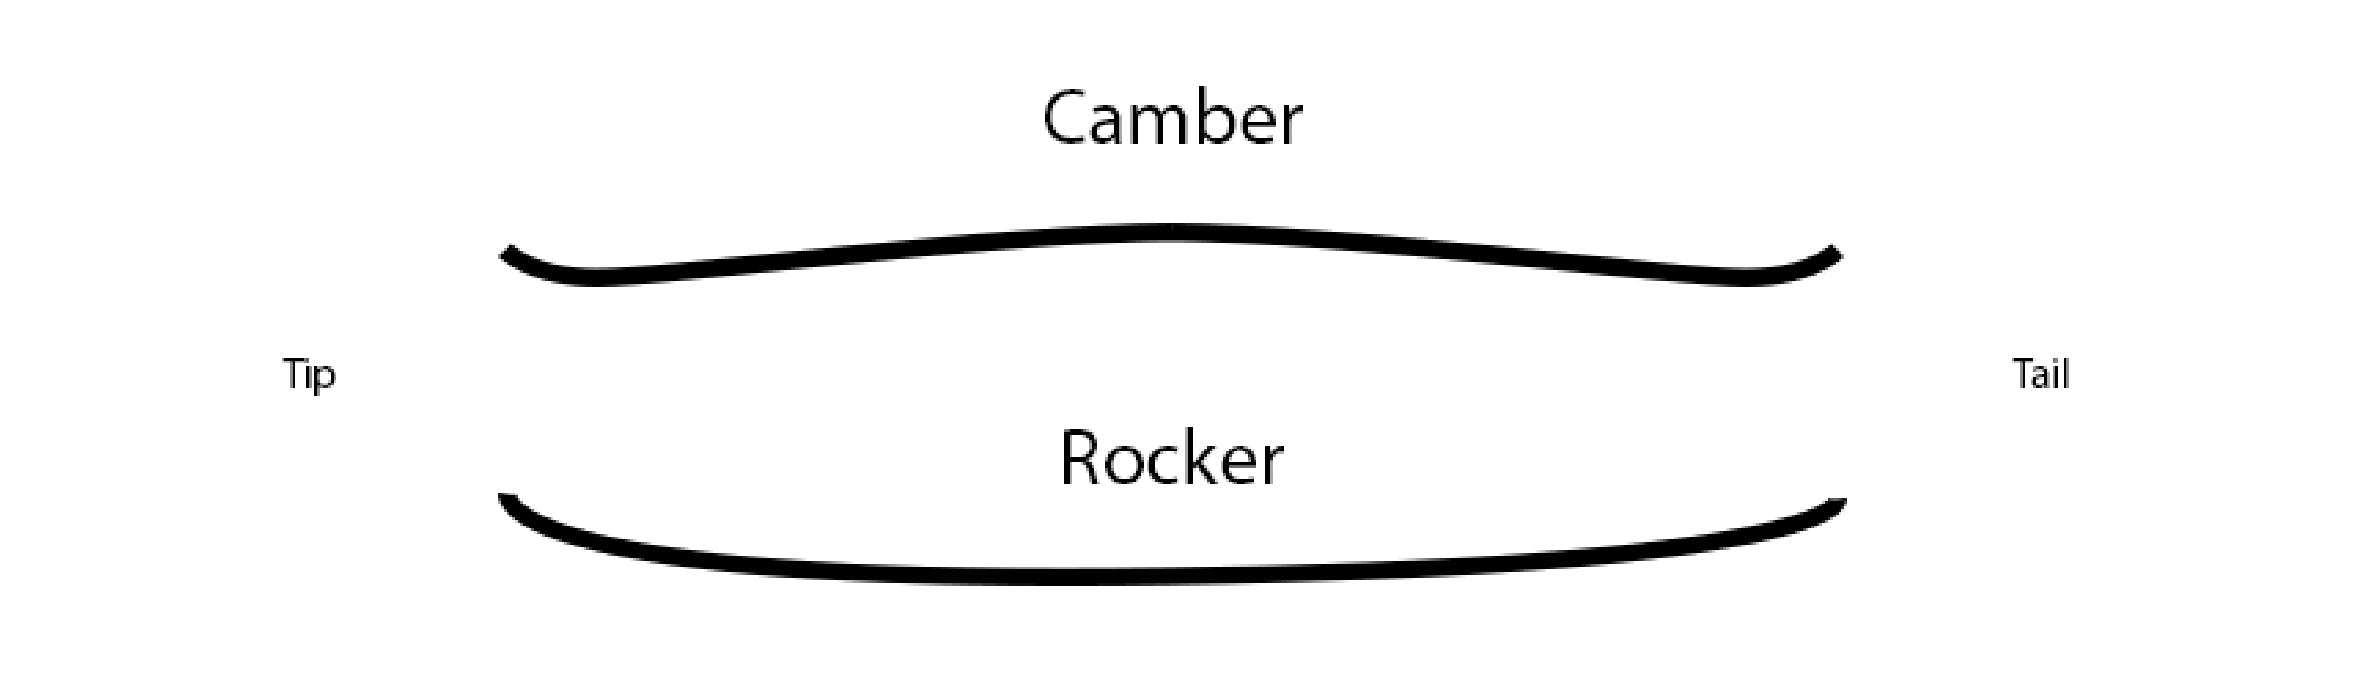 Diagram showing rocker and camber in skis.